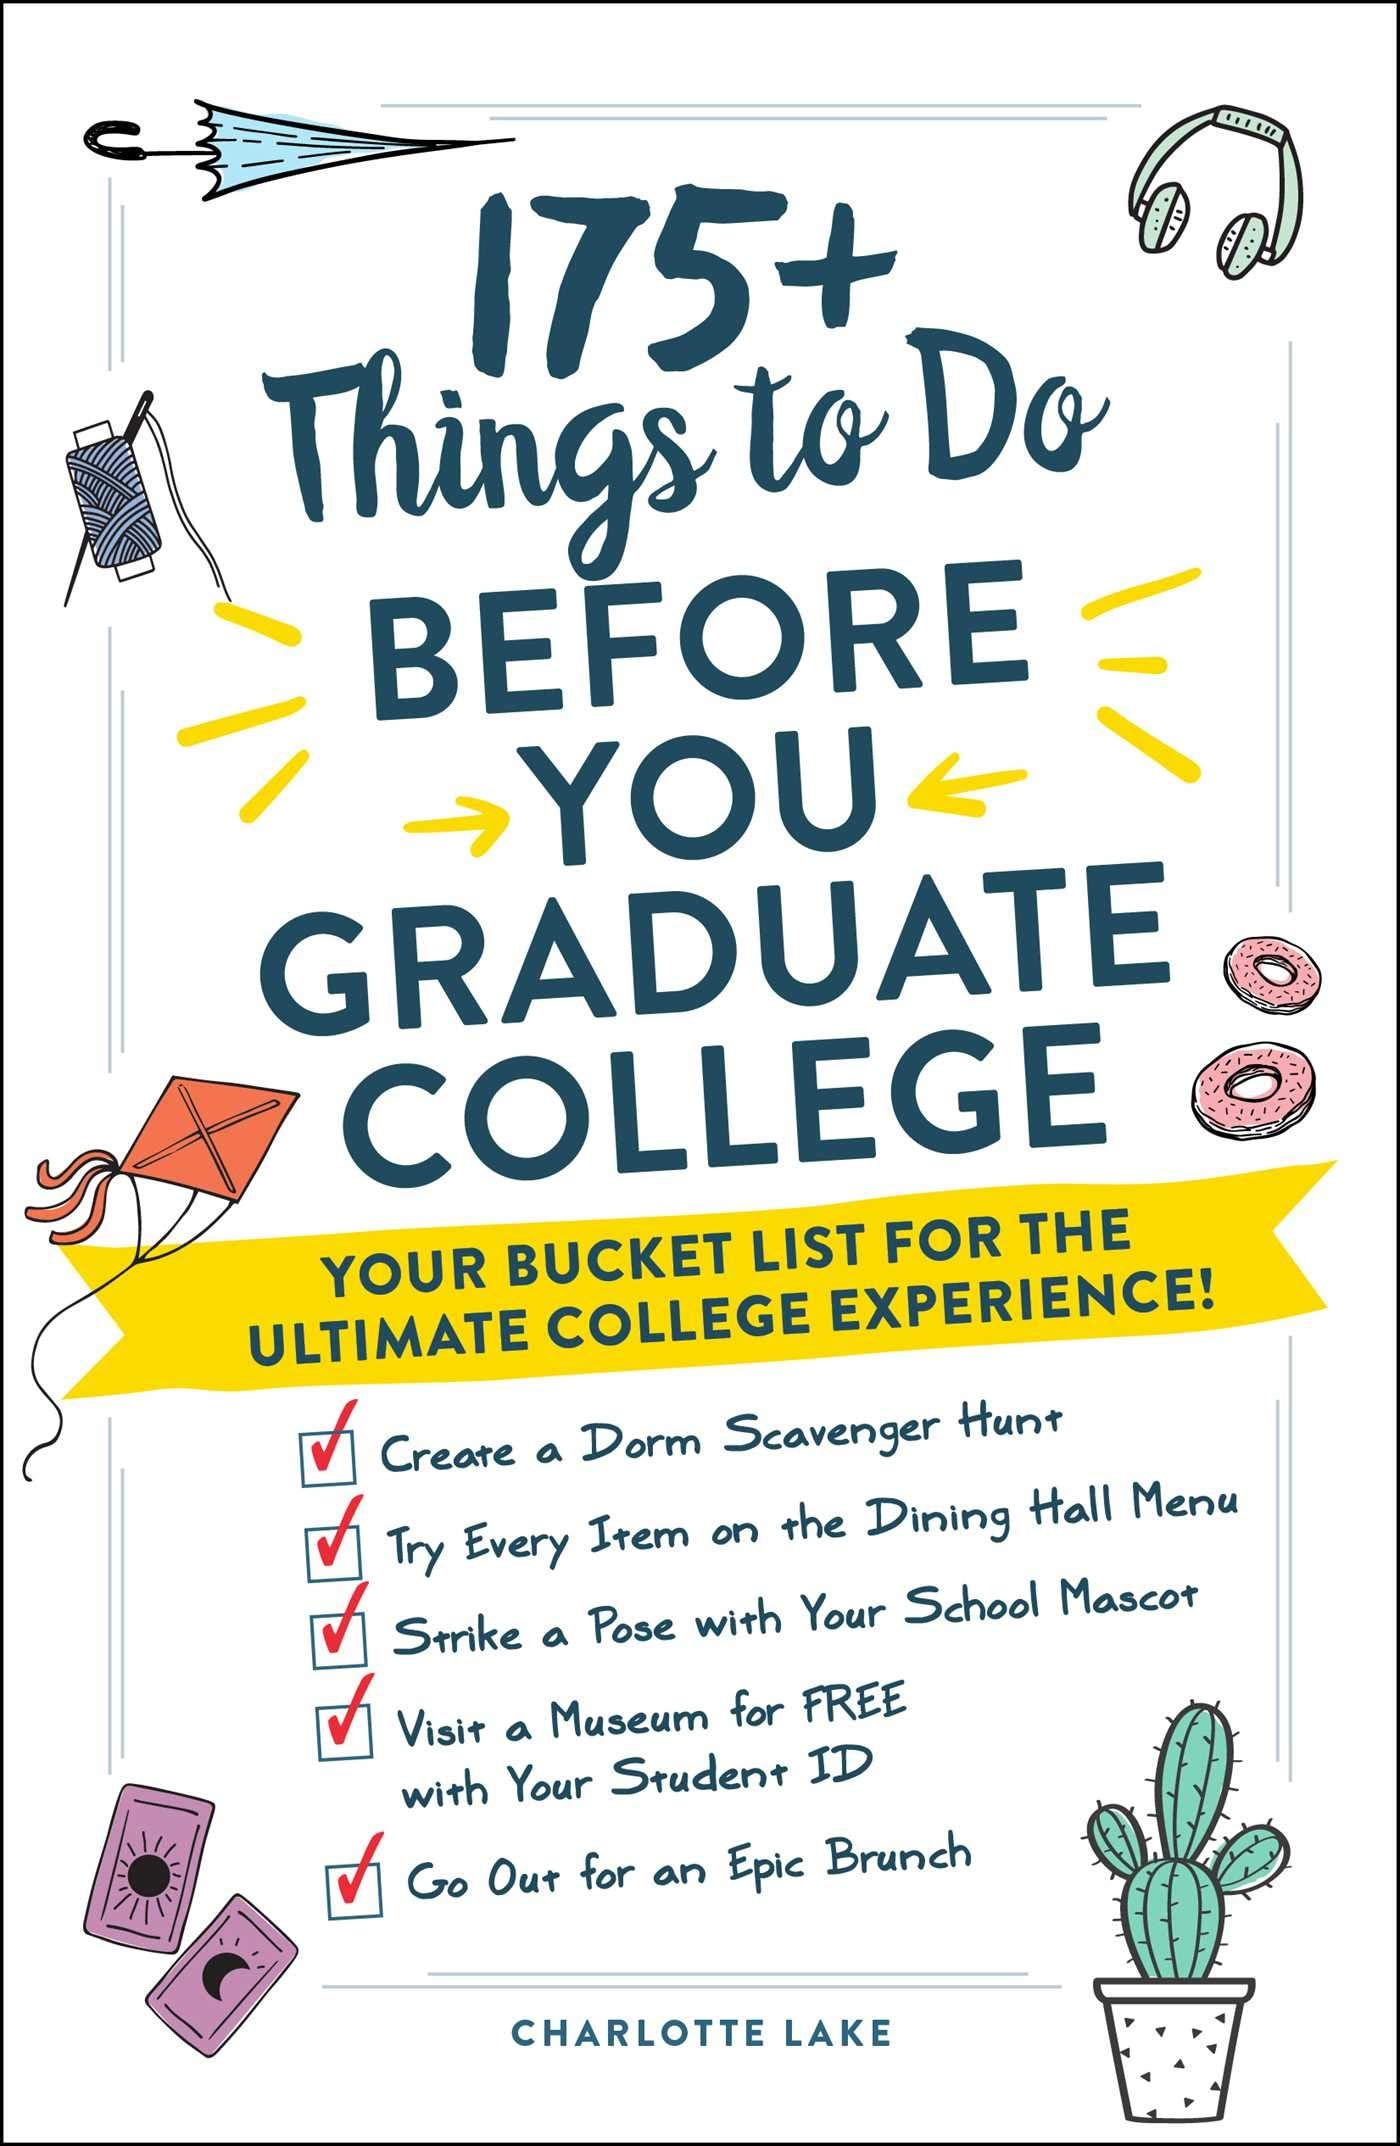 Make the most of your college years with these 175+ unique activities for the ultimate college experience.